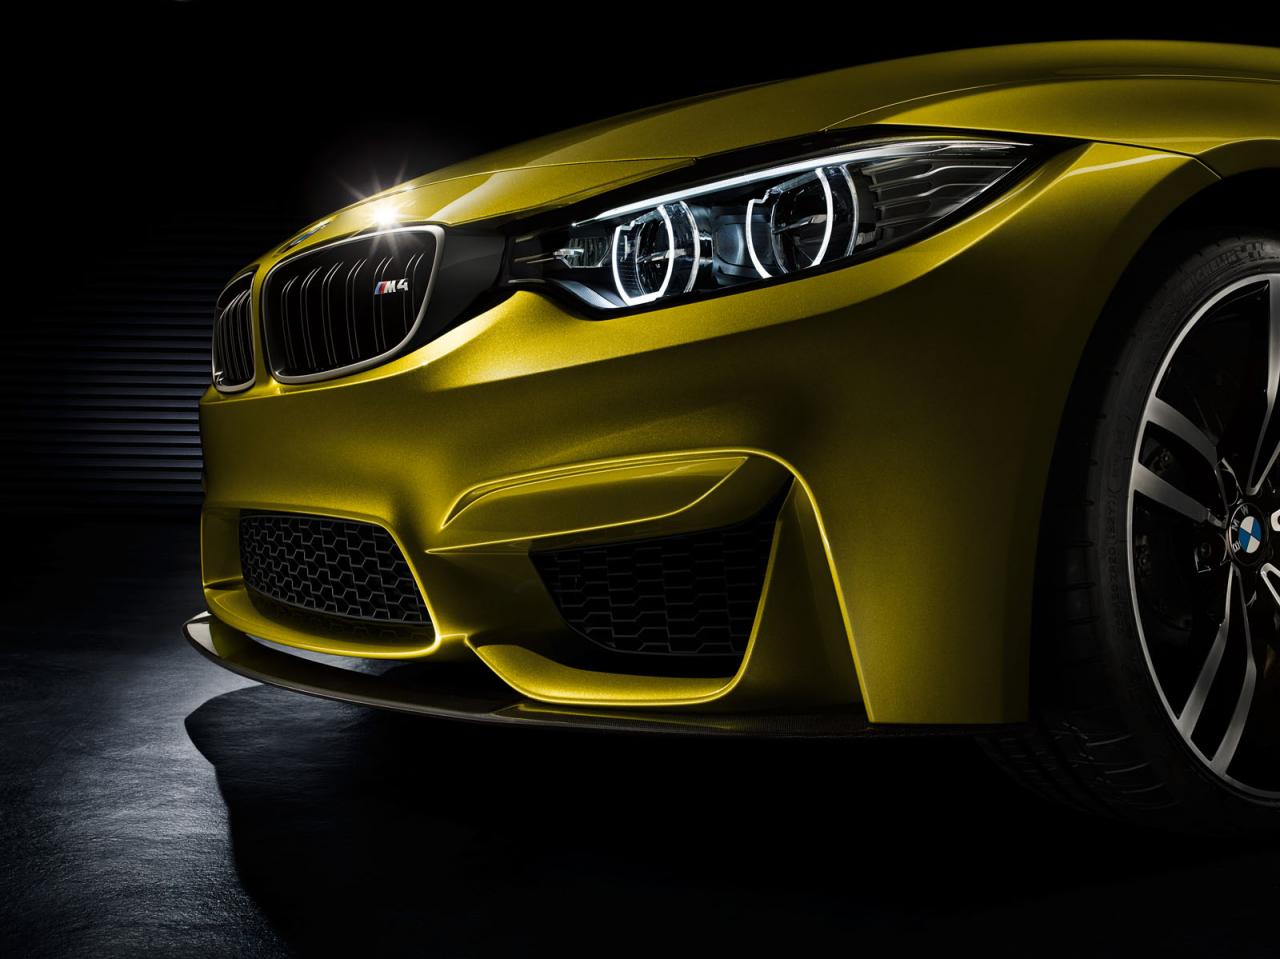 BMW M4 Coupe concept breaks cover